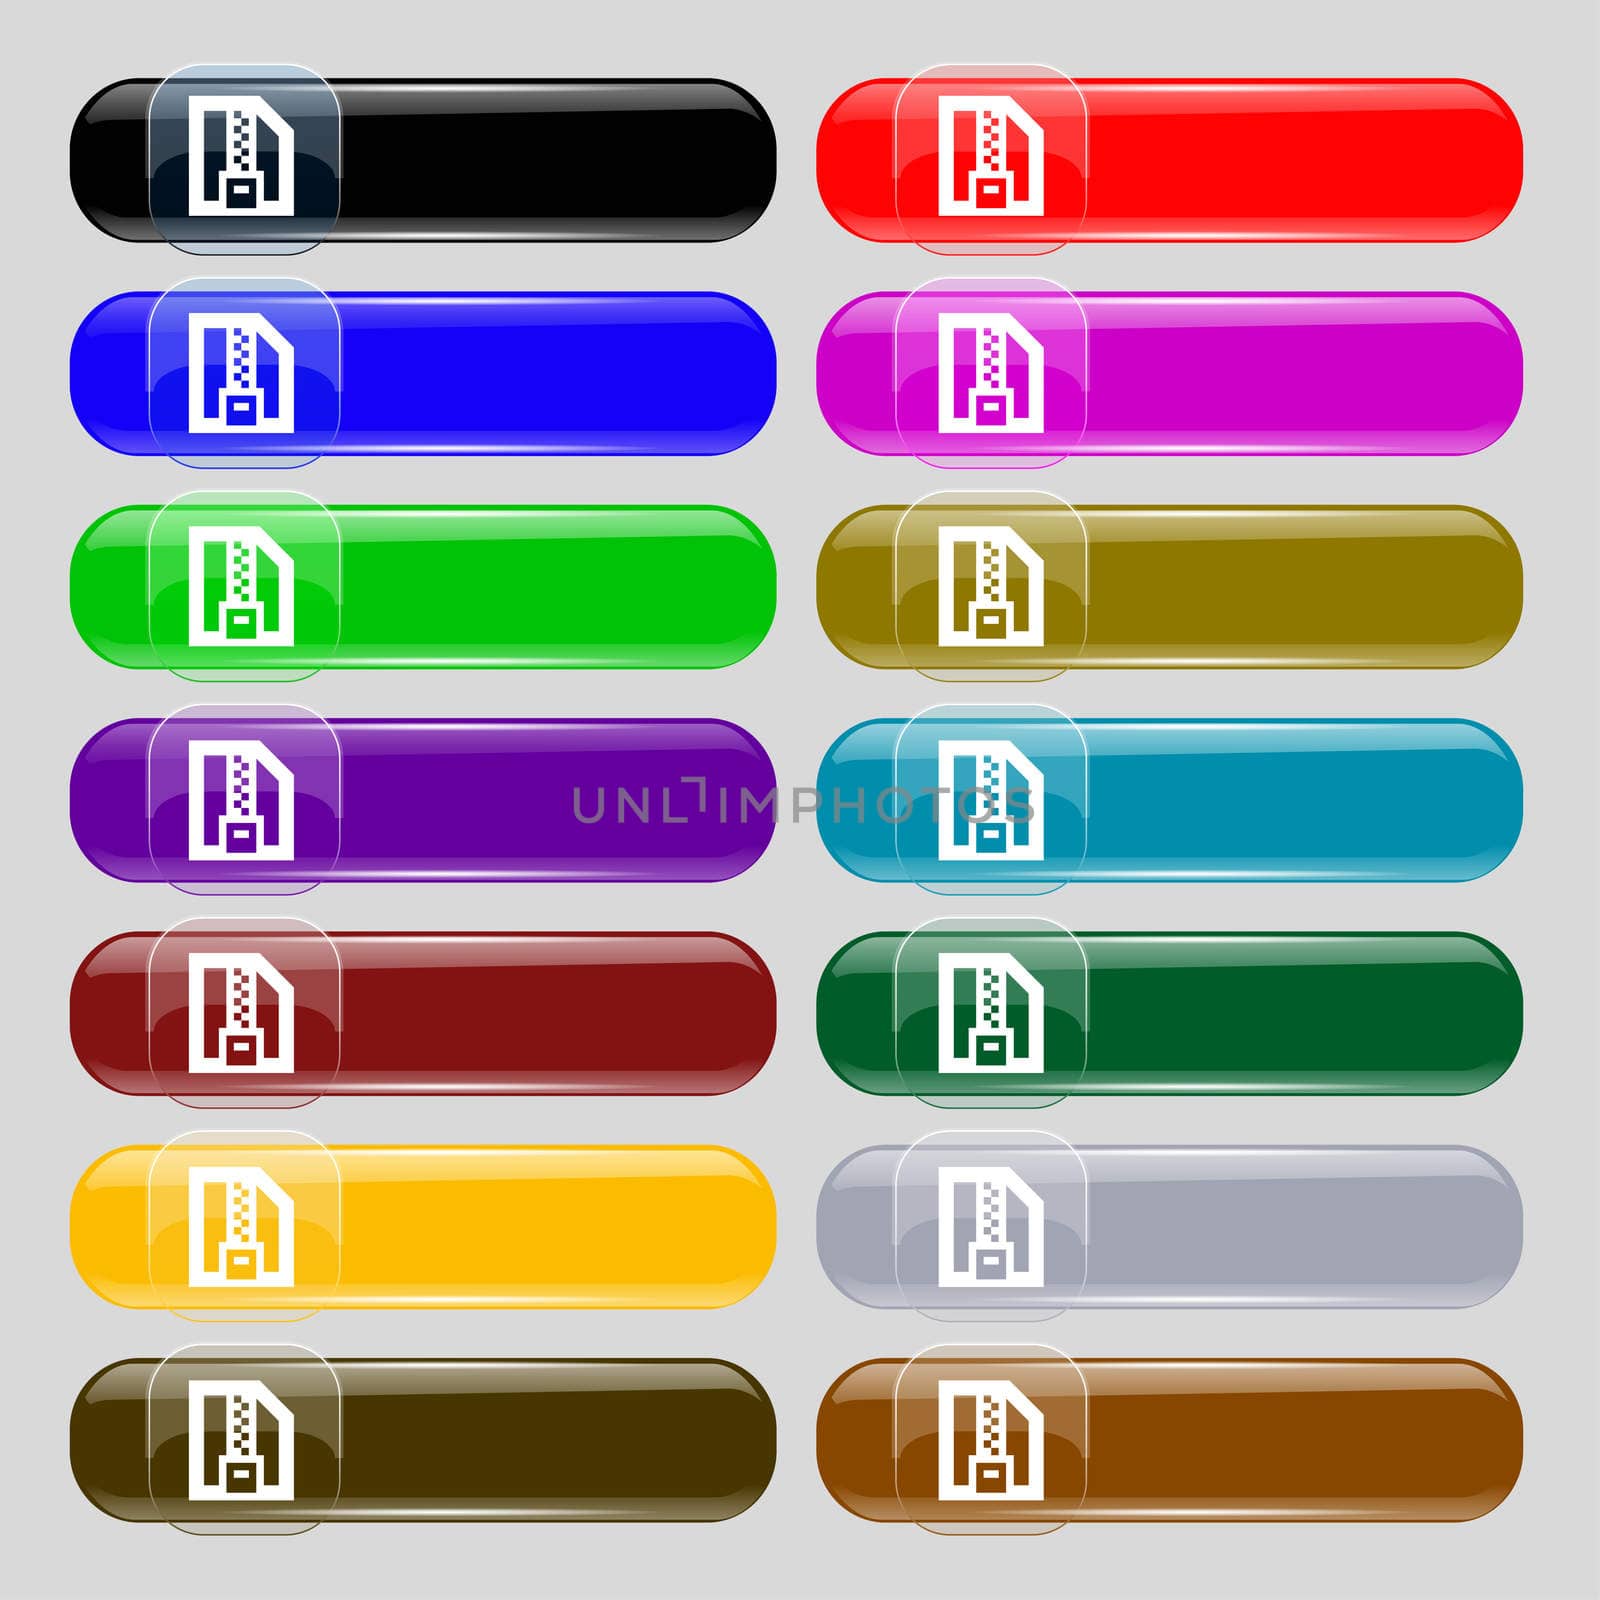 Archive file, Download compressed, ZIP zipped icon sign. Set from fourteen multi-colored glass buttons with place for text. illustration